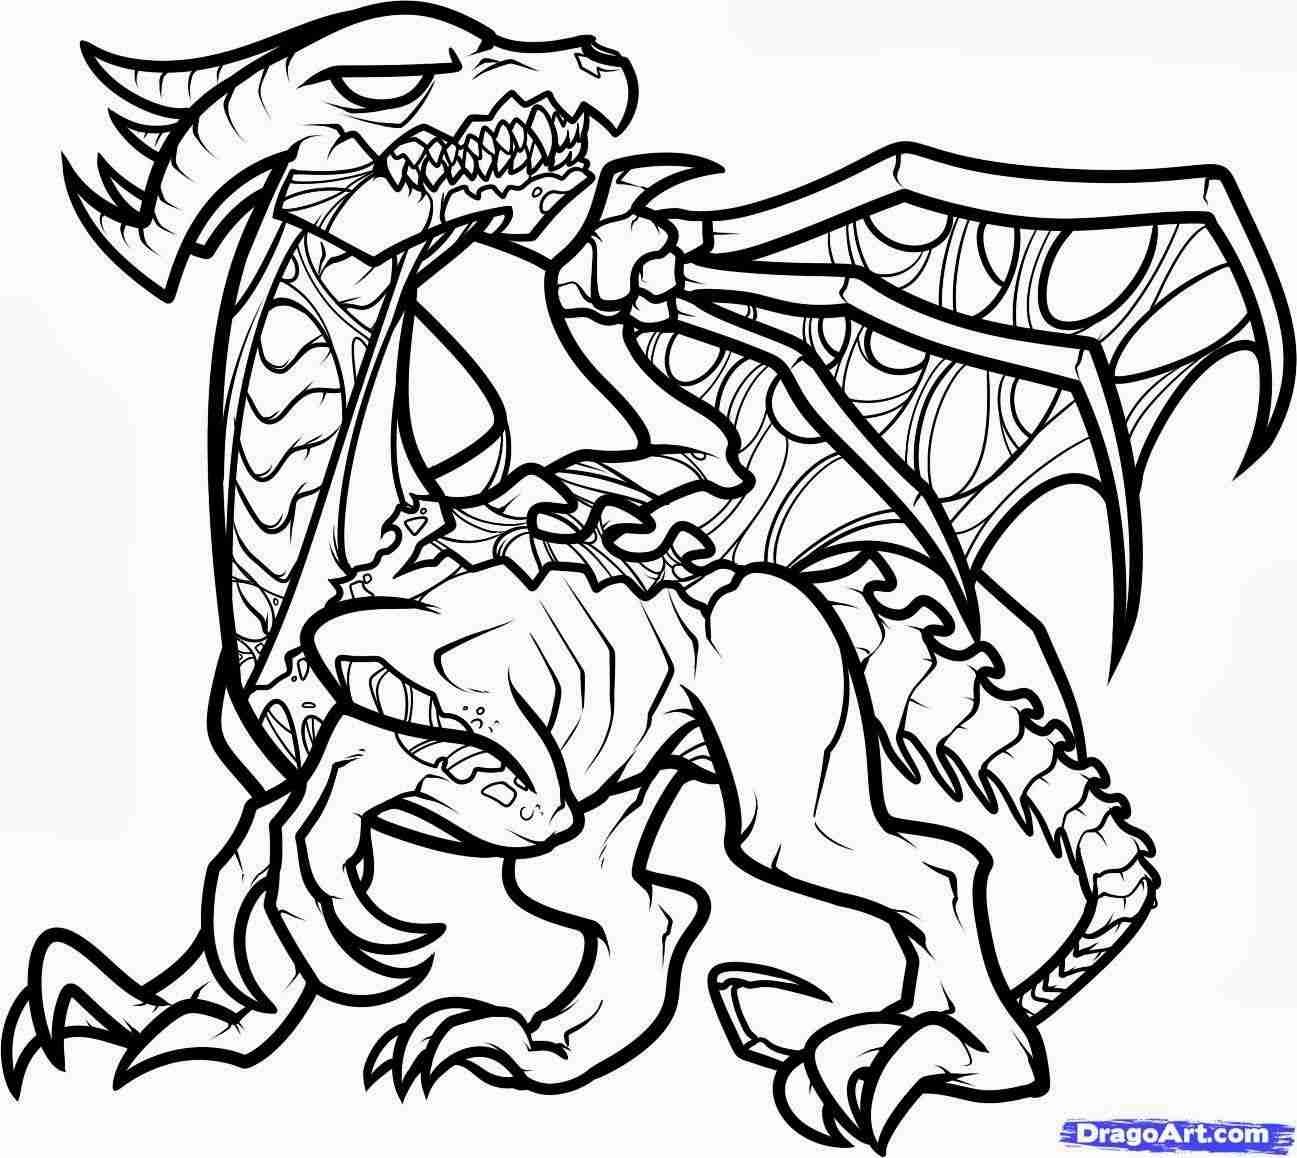 168 Animal Ender Dragon Minecraft Coloring Pages with Printable